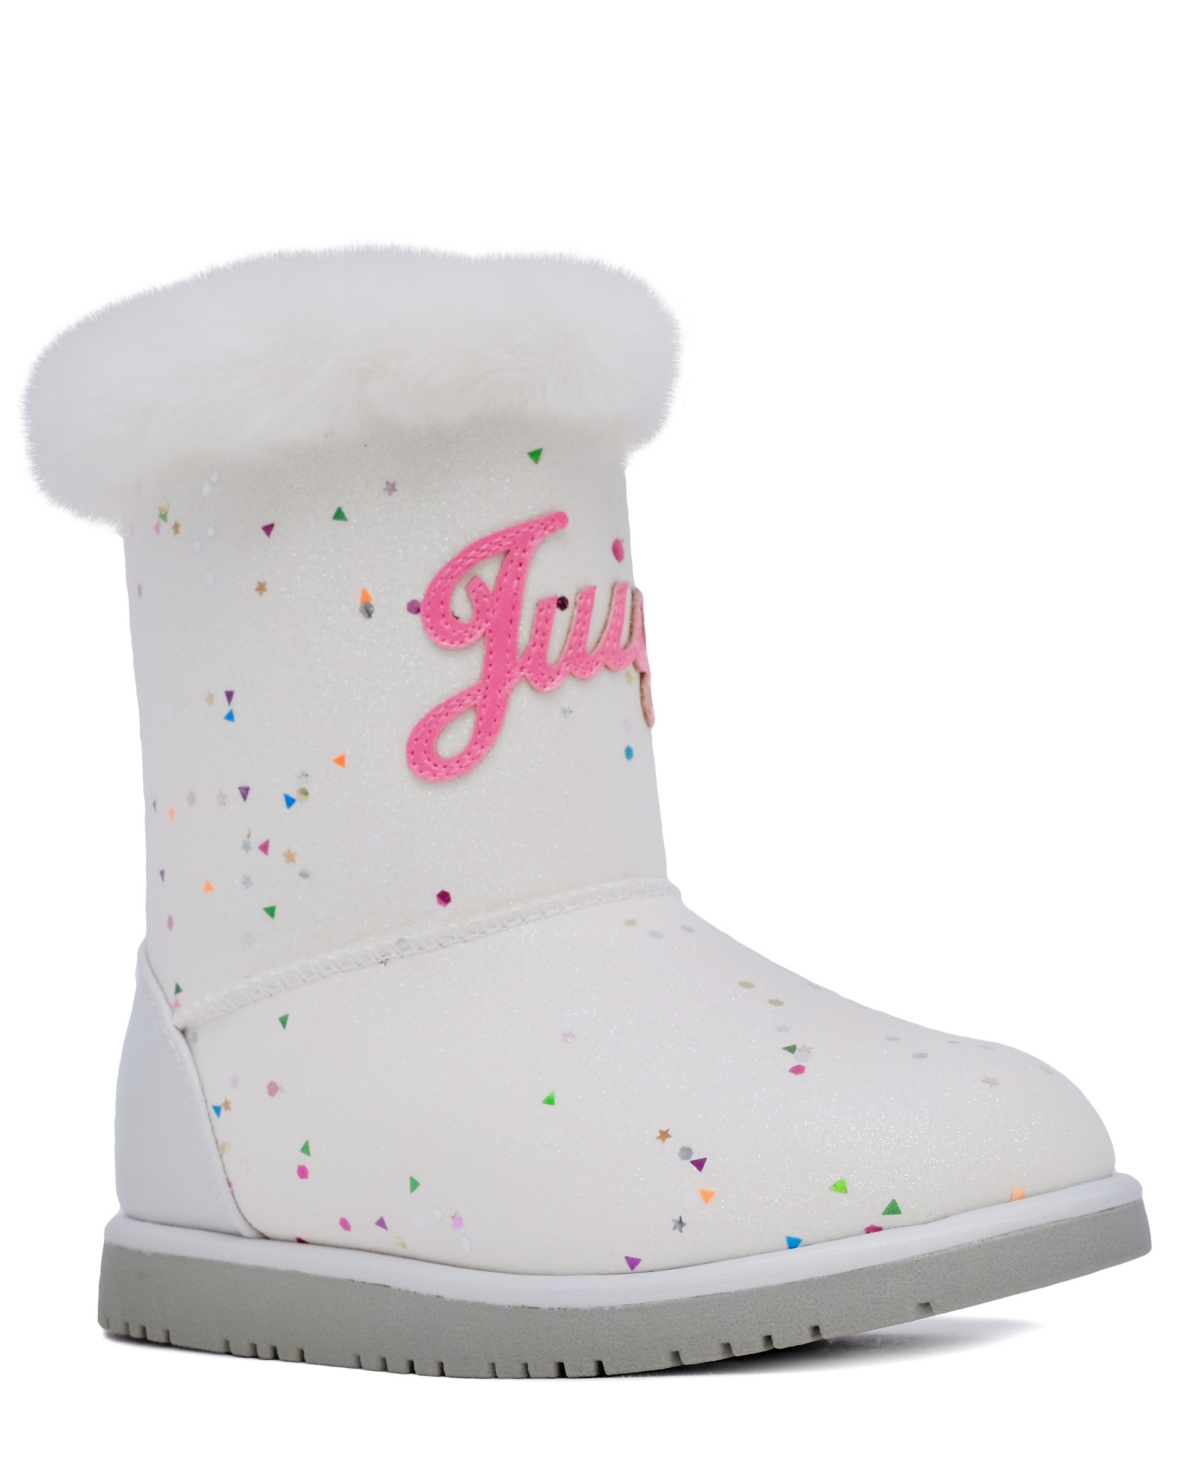 JUICY COUTURE BIG GIRLS MALIBU COLD WEATHER SLIP ON BOOTS